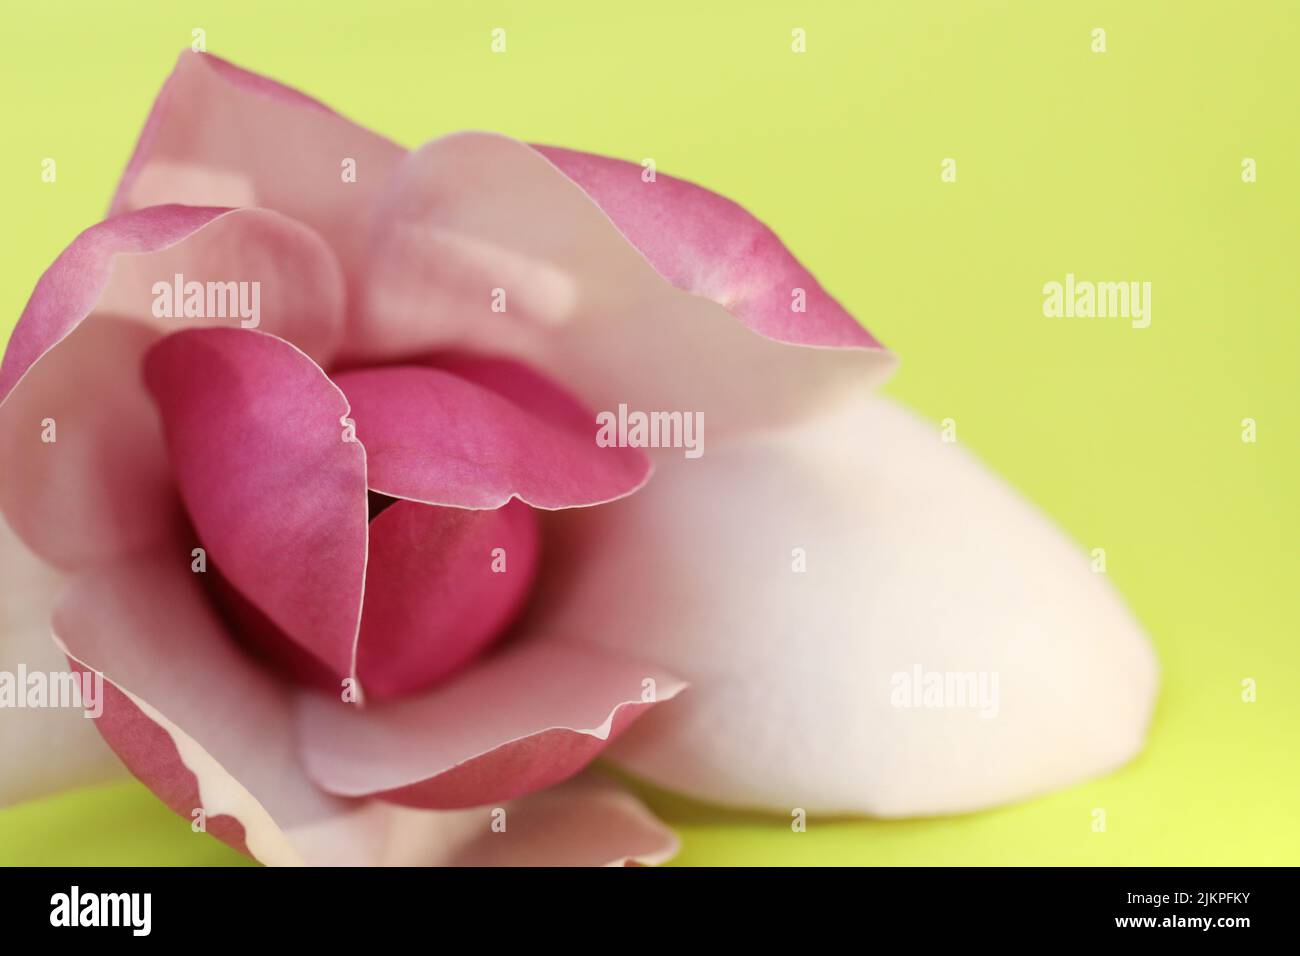 A delicate perfect pink Magnolia flower and pale soft petals against a bright green background Stock Photo